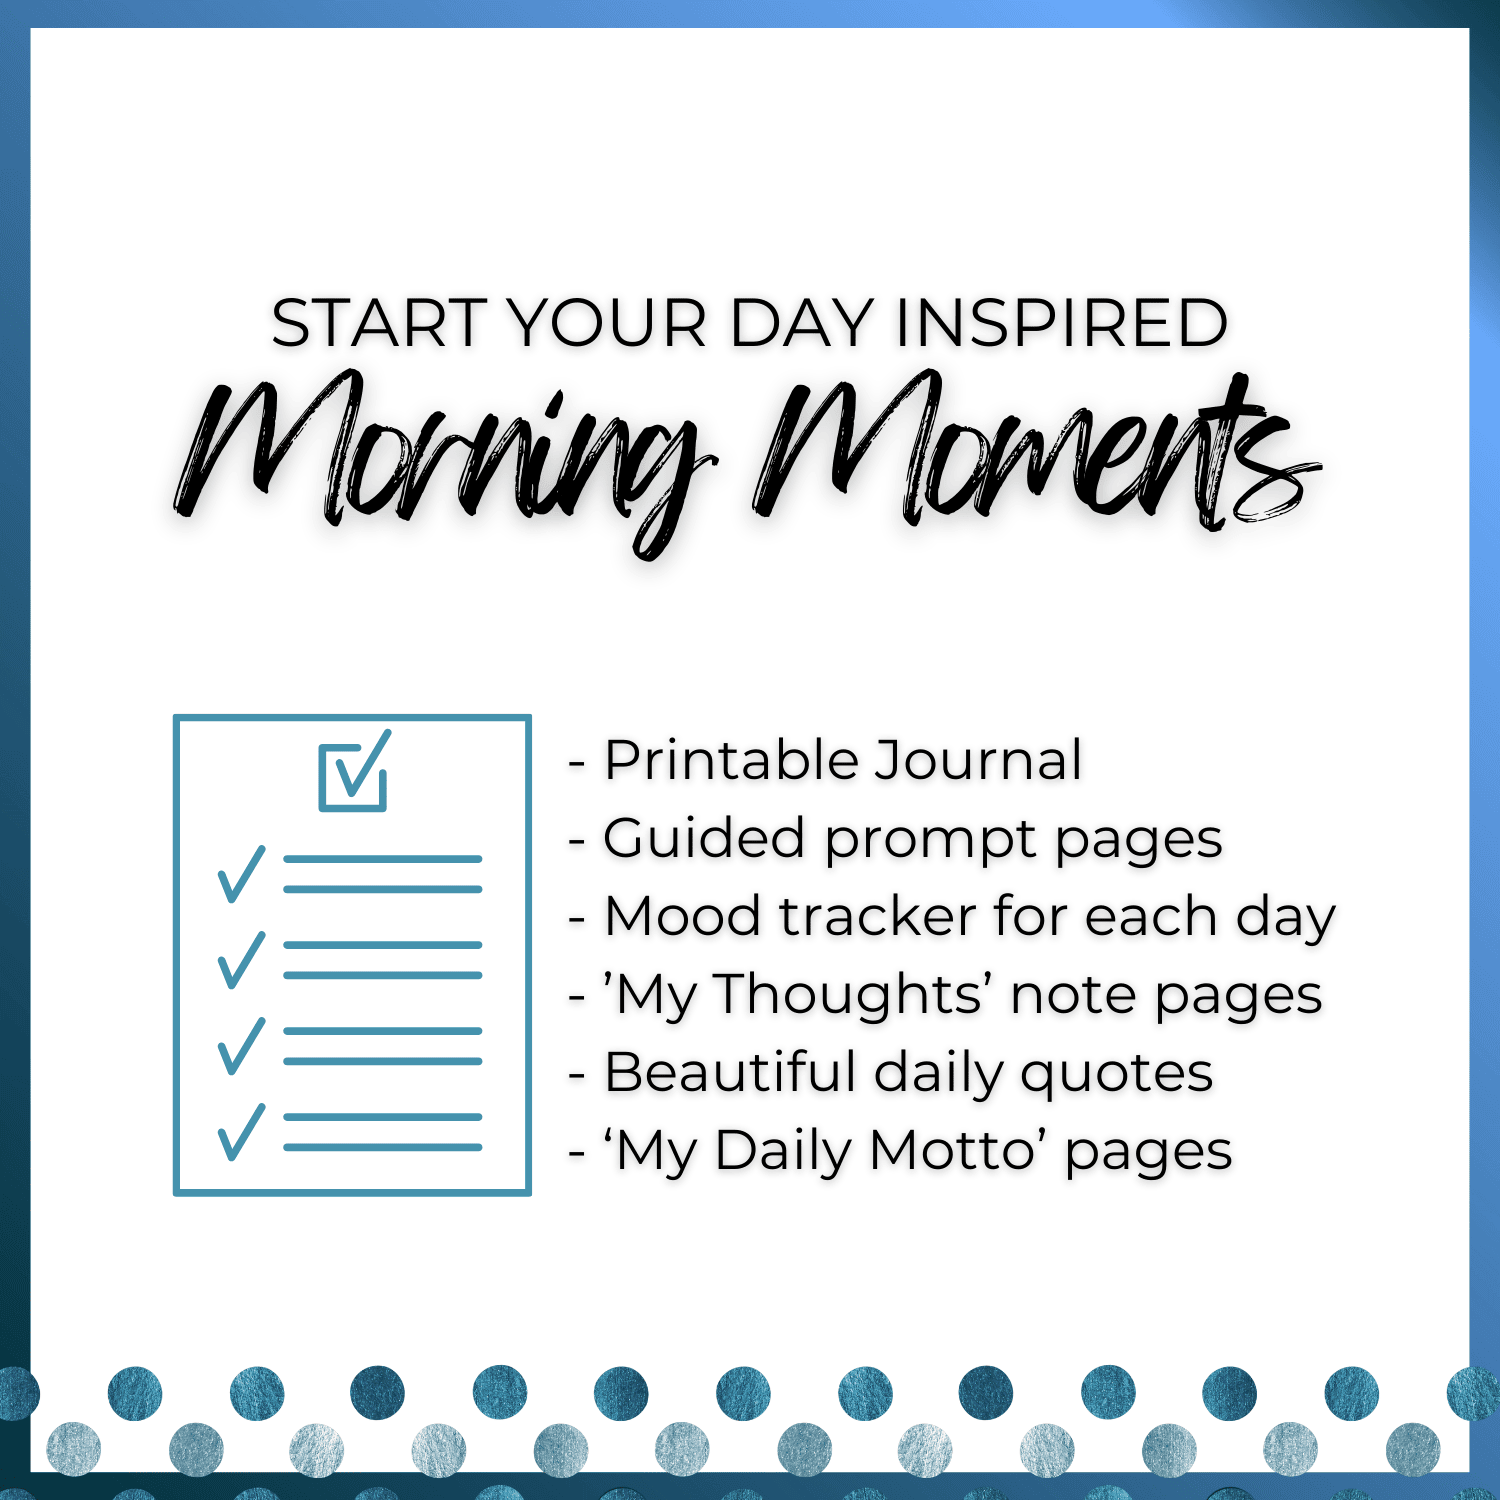 This is a mockup image of my Morning Moments Printable Journals listing what is included and showing an icon of a paper with check list.